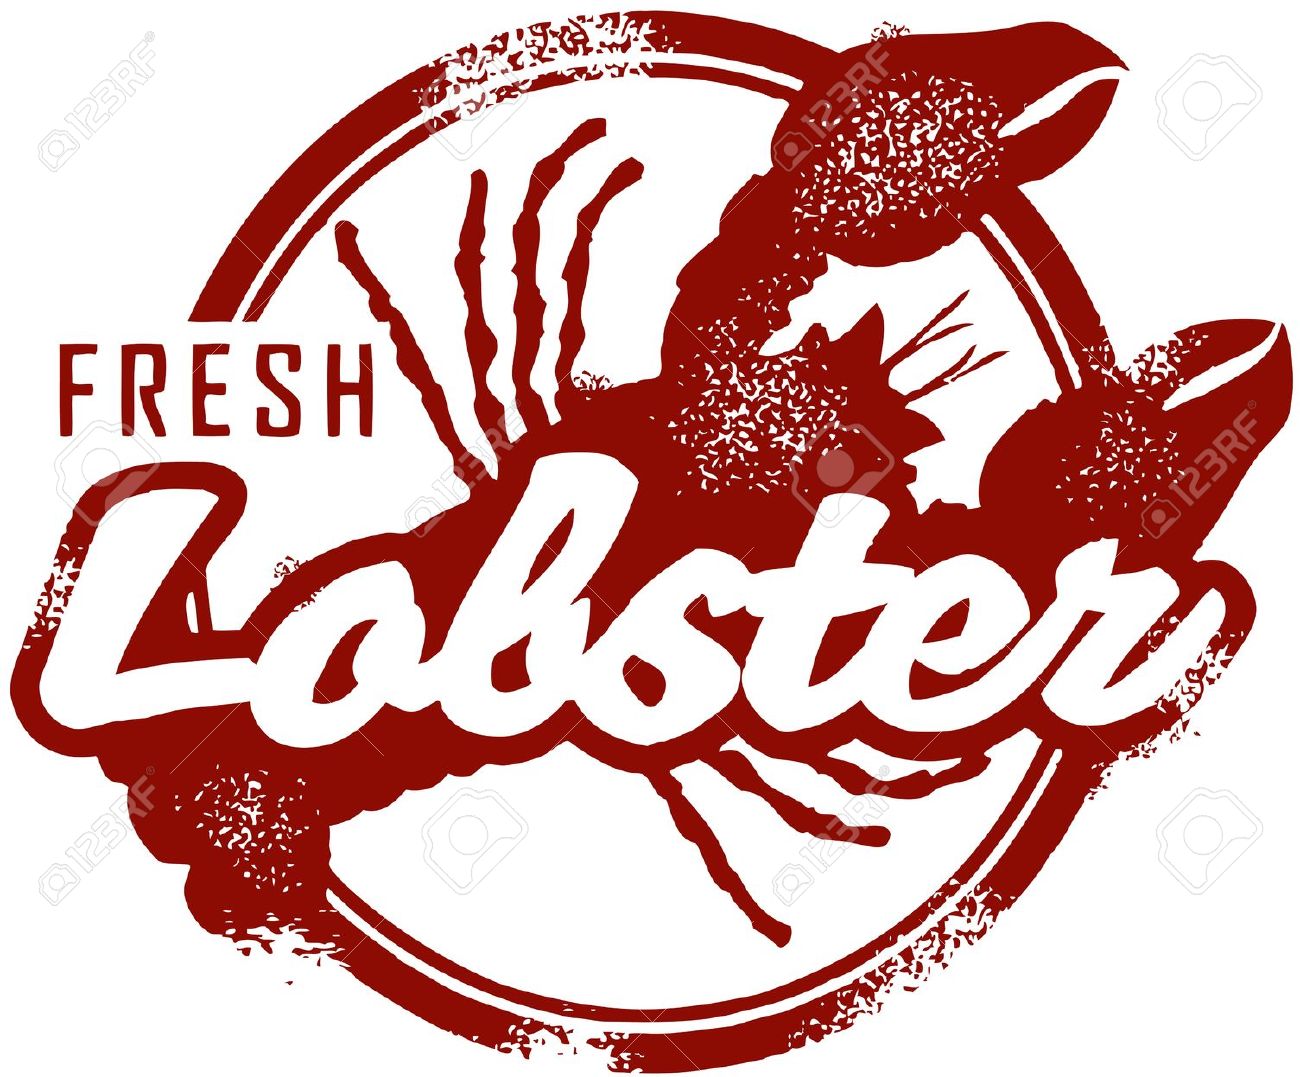 free clipart images lobster - photo #34